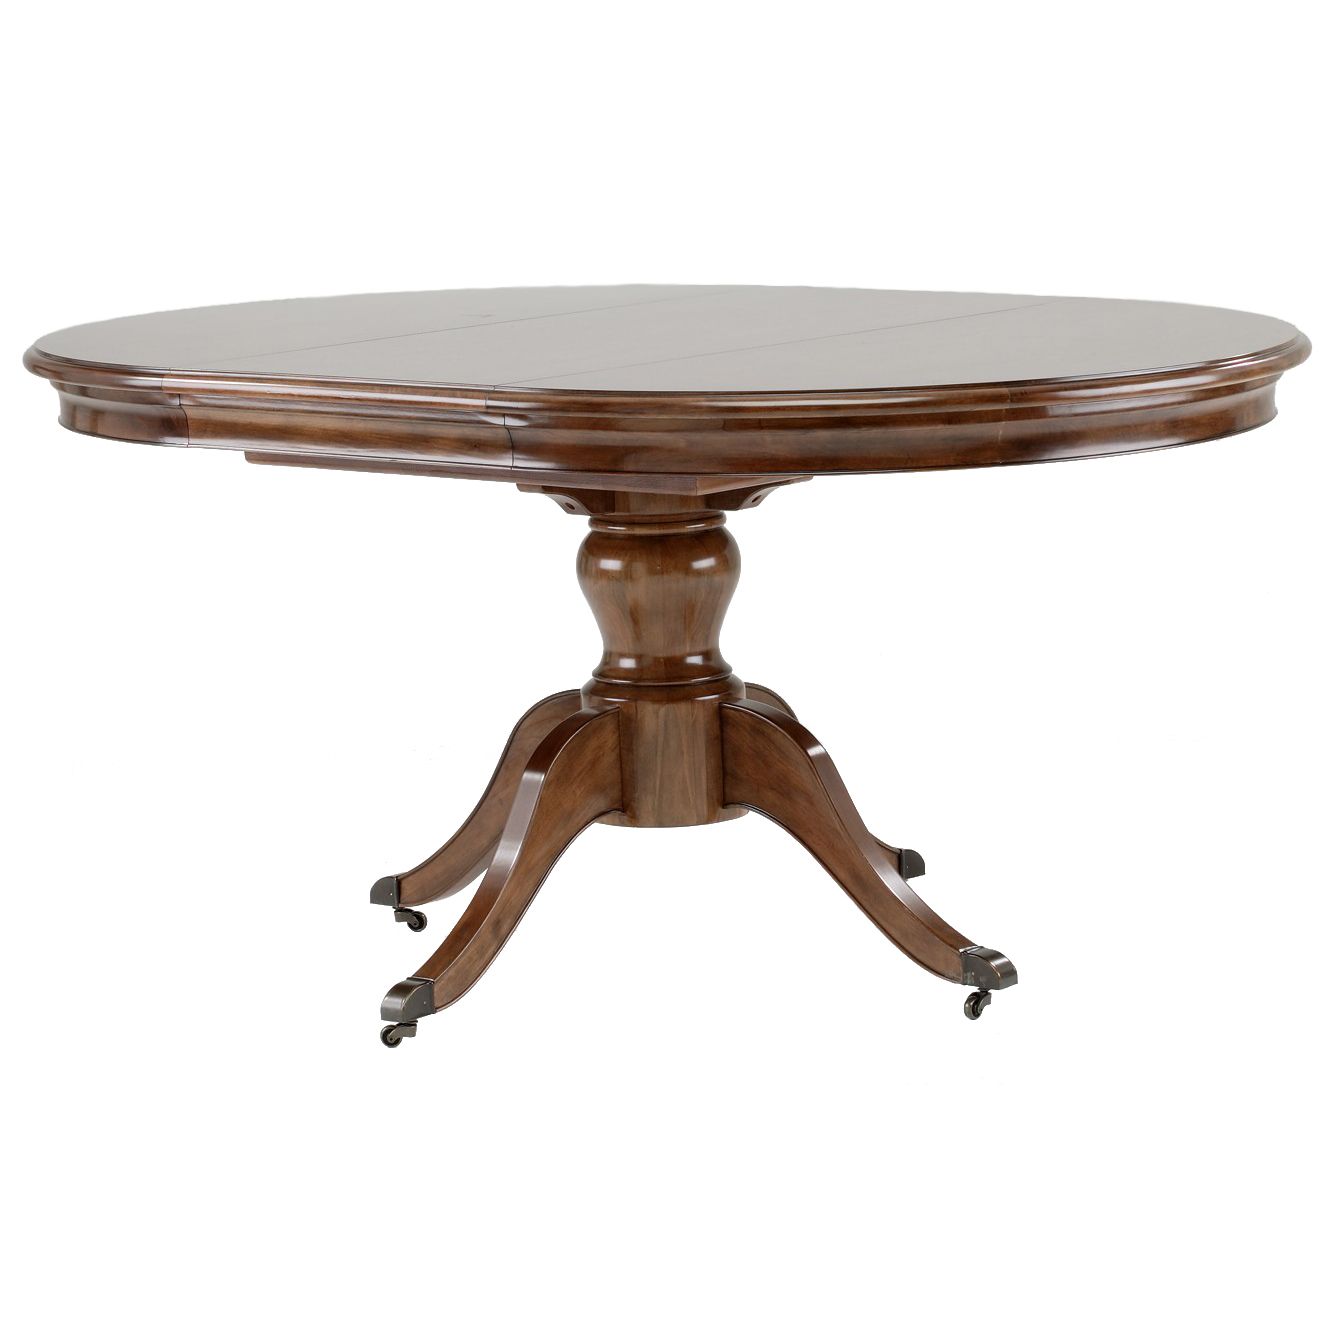 Lille Round Extending Dining Table at John Lewis